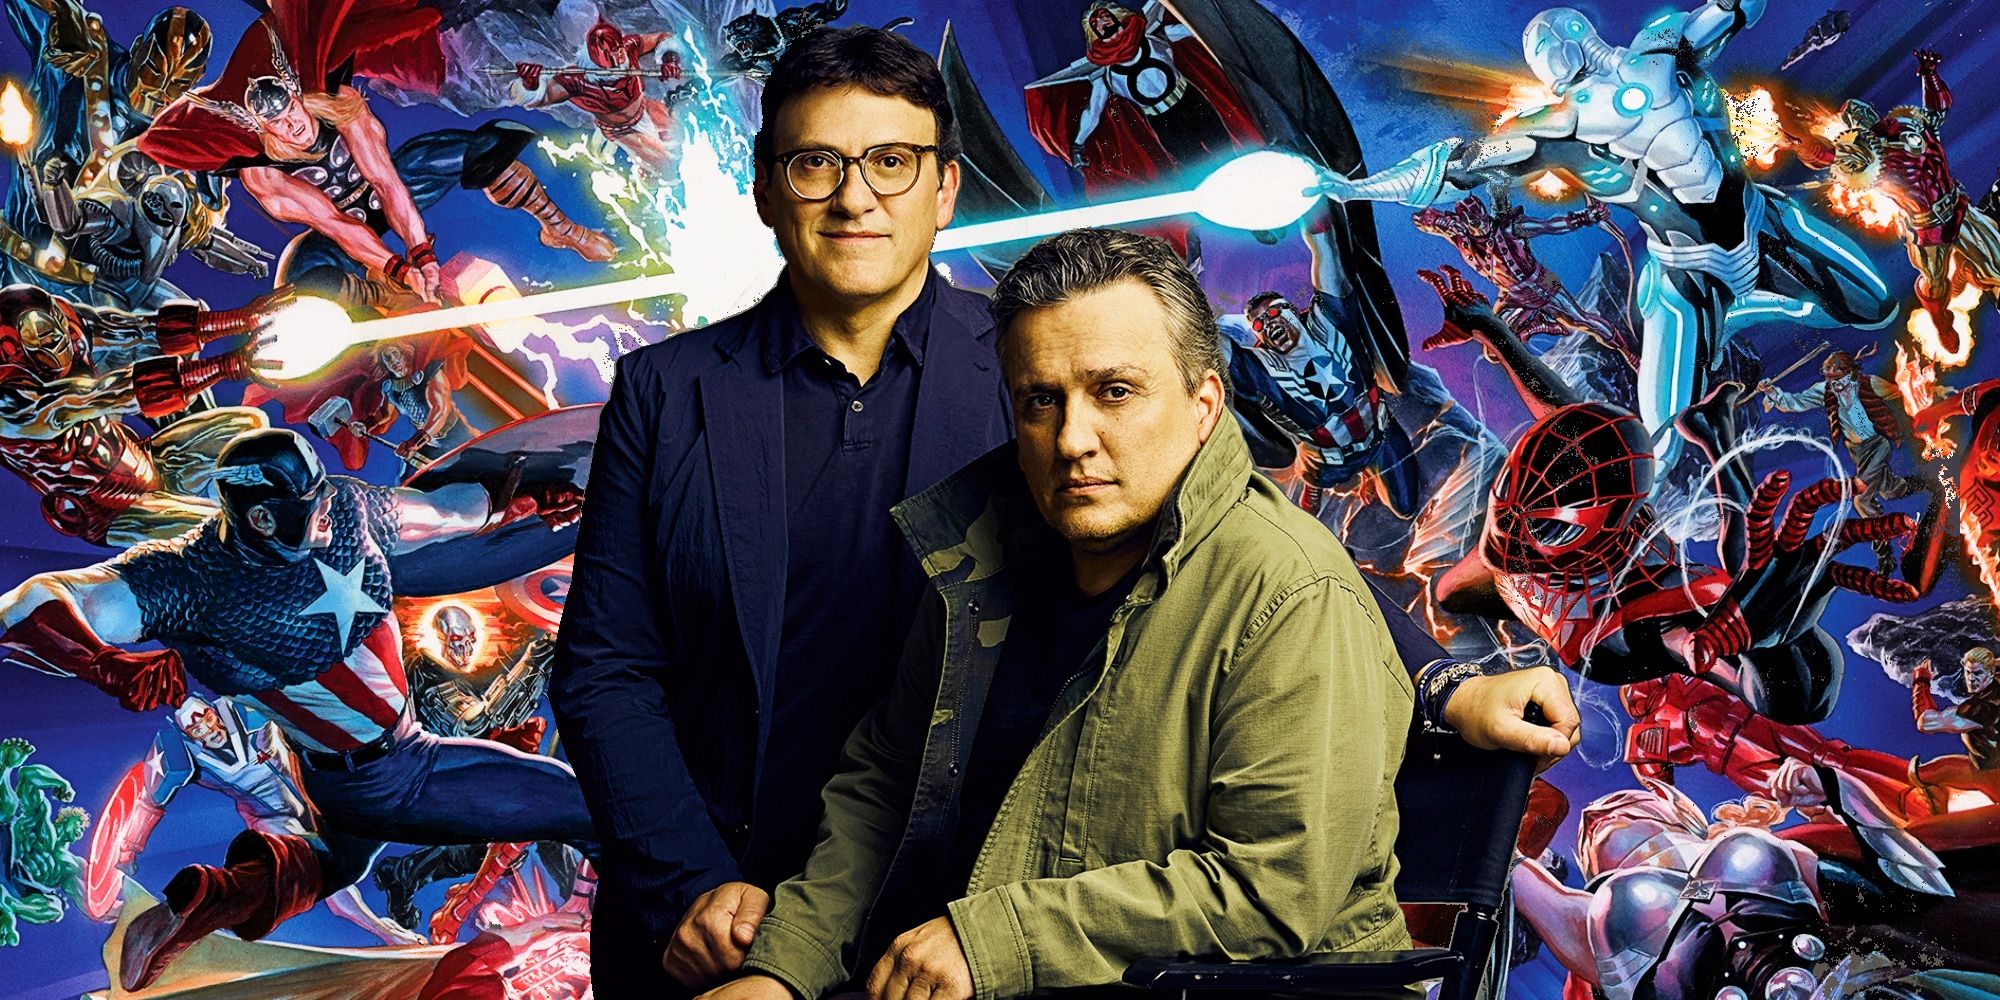 the russo brothers posing for photoshoot and marvel's secret wars main fandom graphic